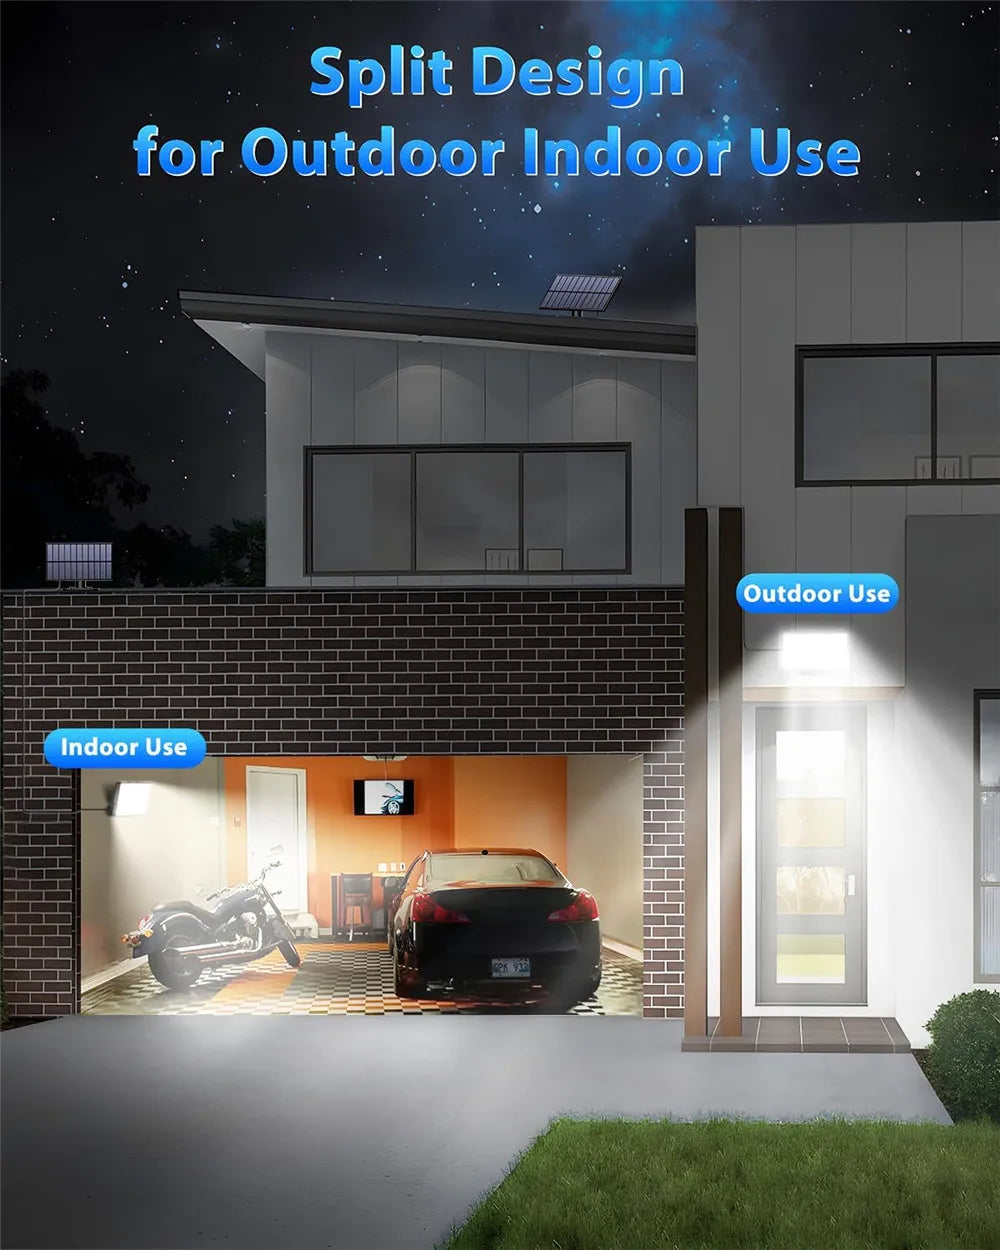 172LED Solar Light Outdoor Waterproof with Motion Sensor Floodlight Remote Control 3 Modes for Patio Garage Backyard